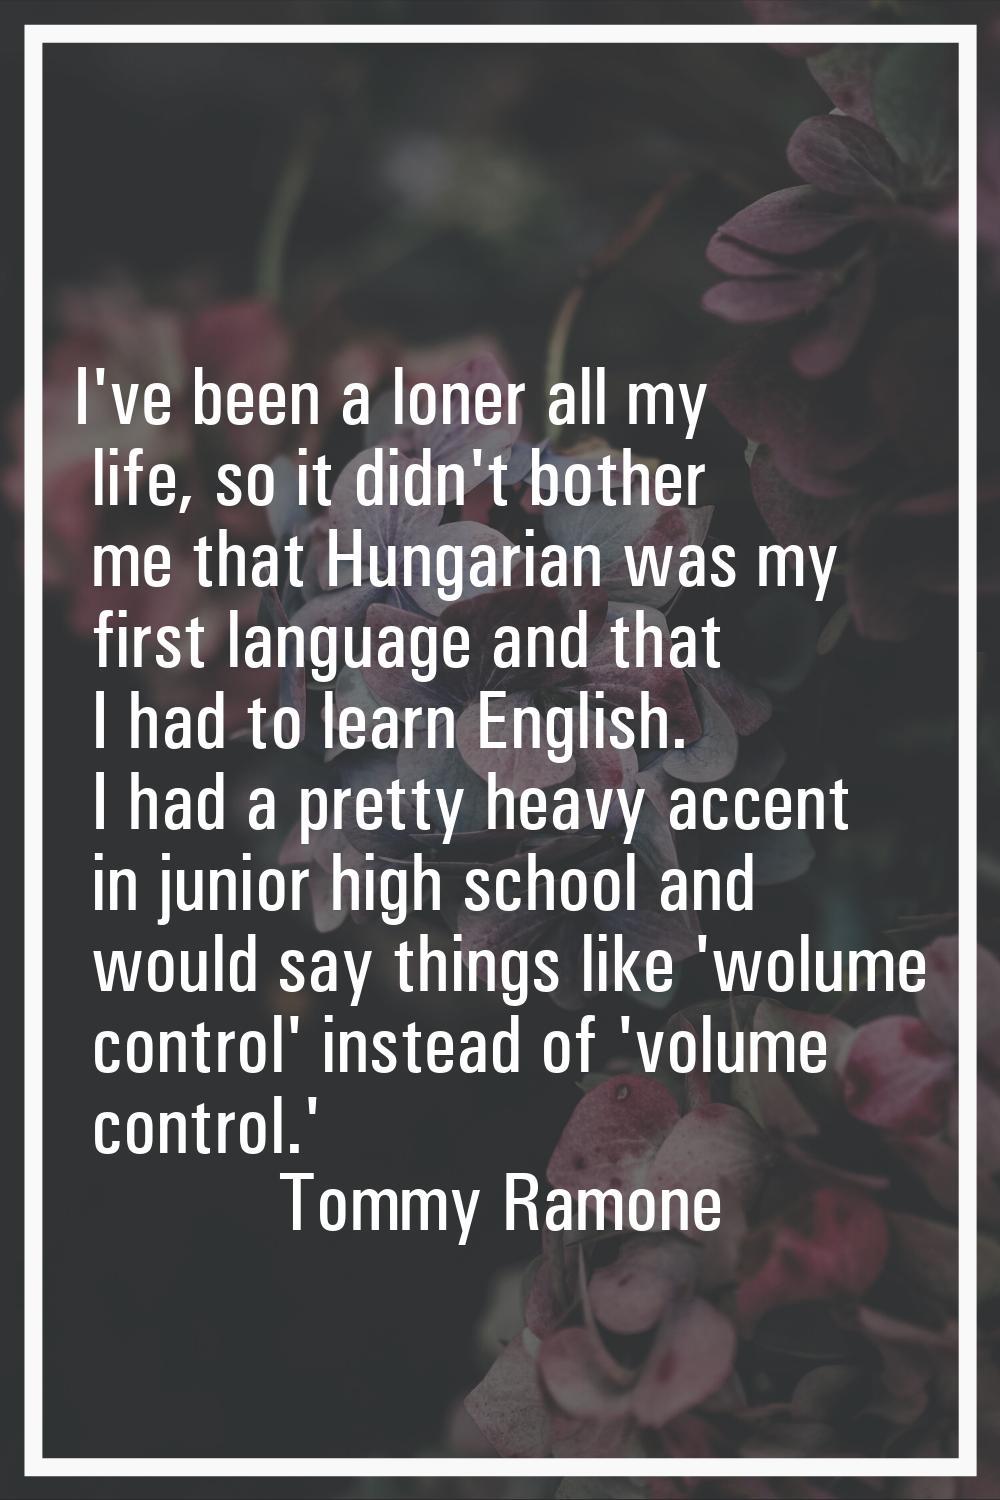 I've been a loner all my life, so it didn't bother me that Hungarian was my first language and that